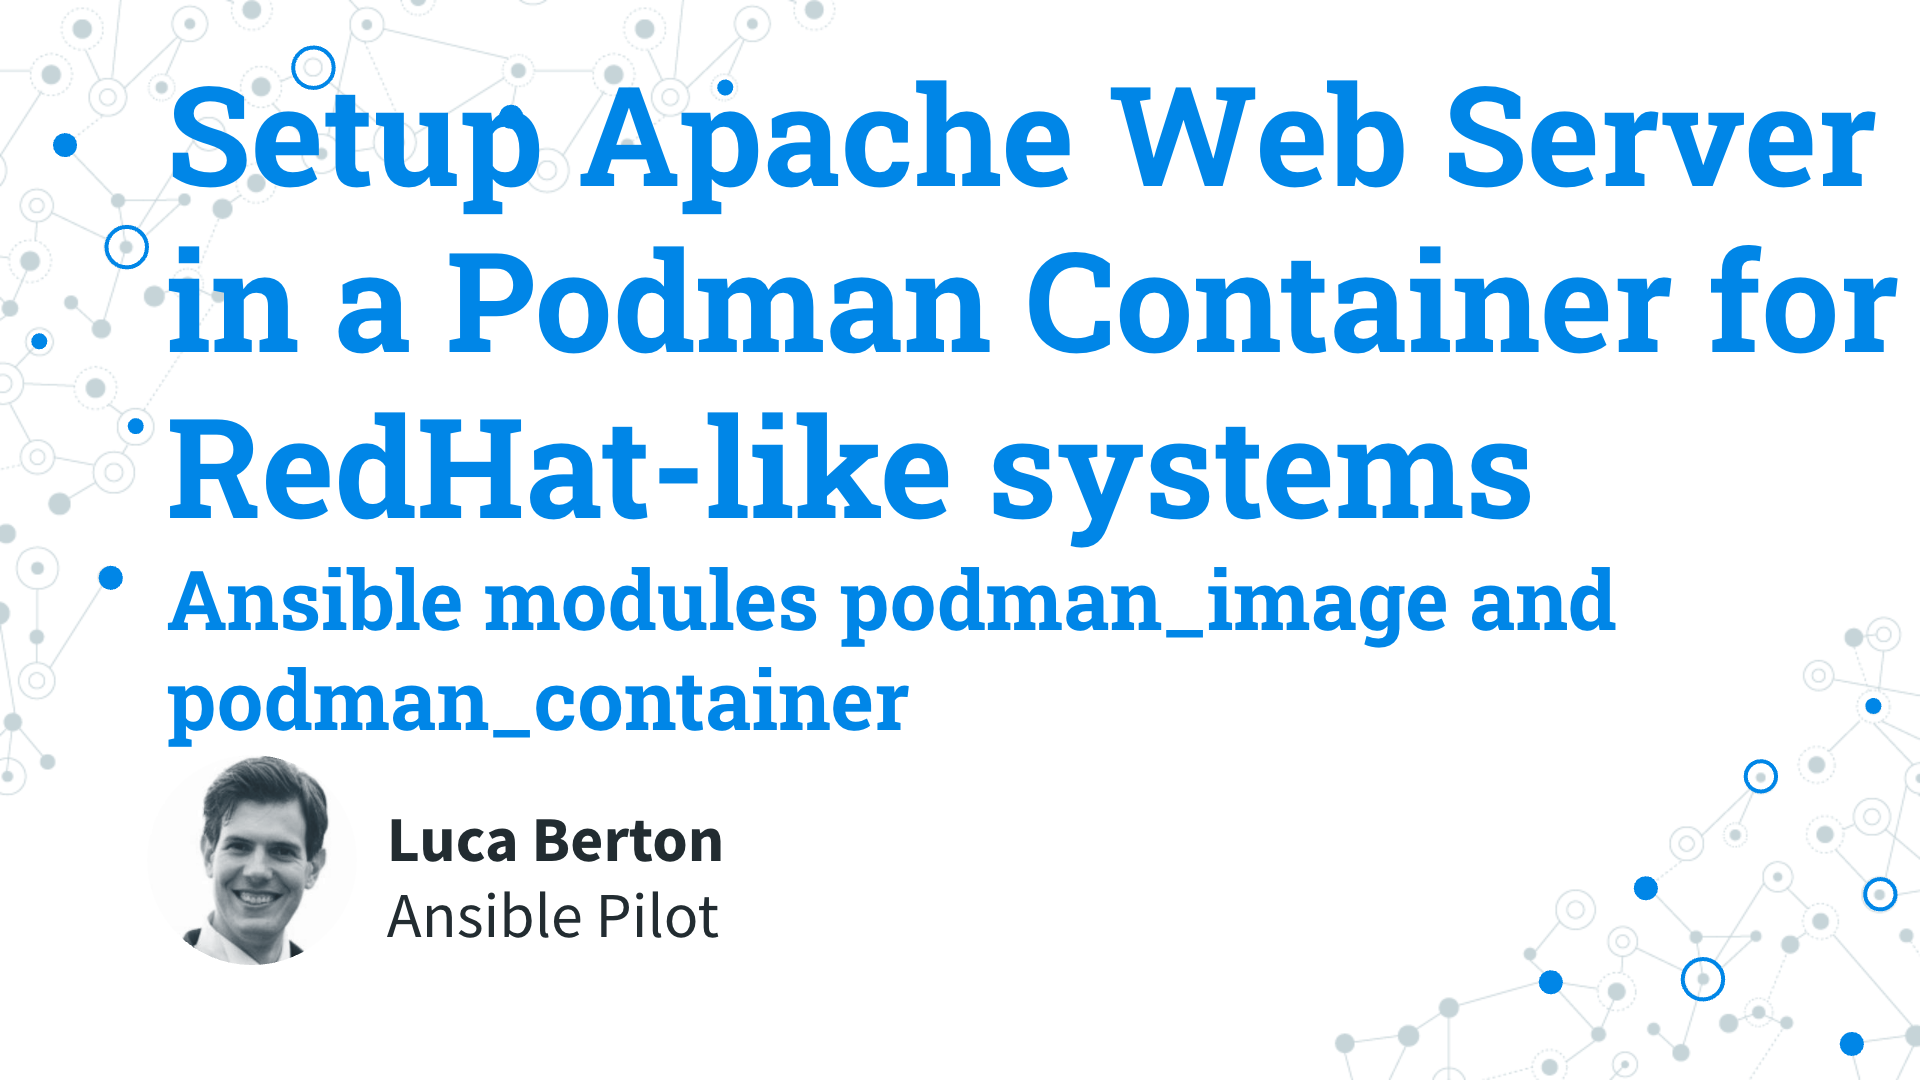 Deploy Apache Web Server in a Podman Container for RedHat-like systems - Ansible modules podman_image and podman_container